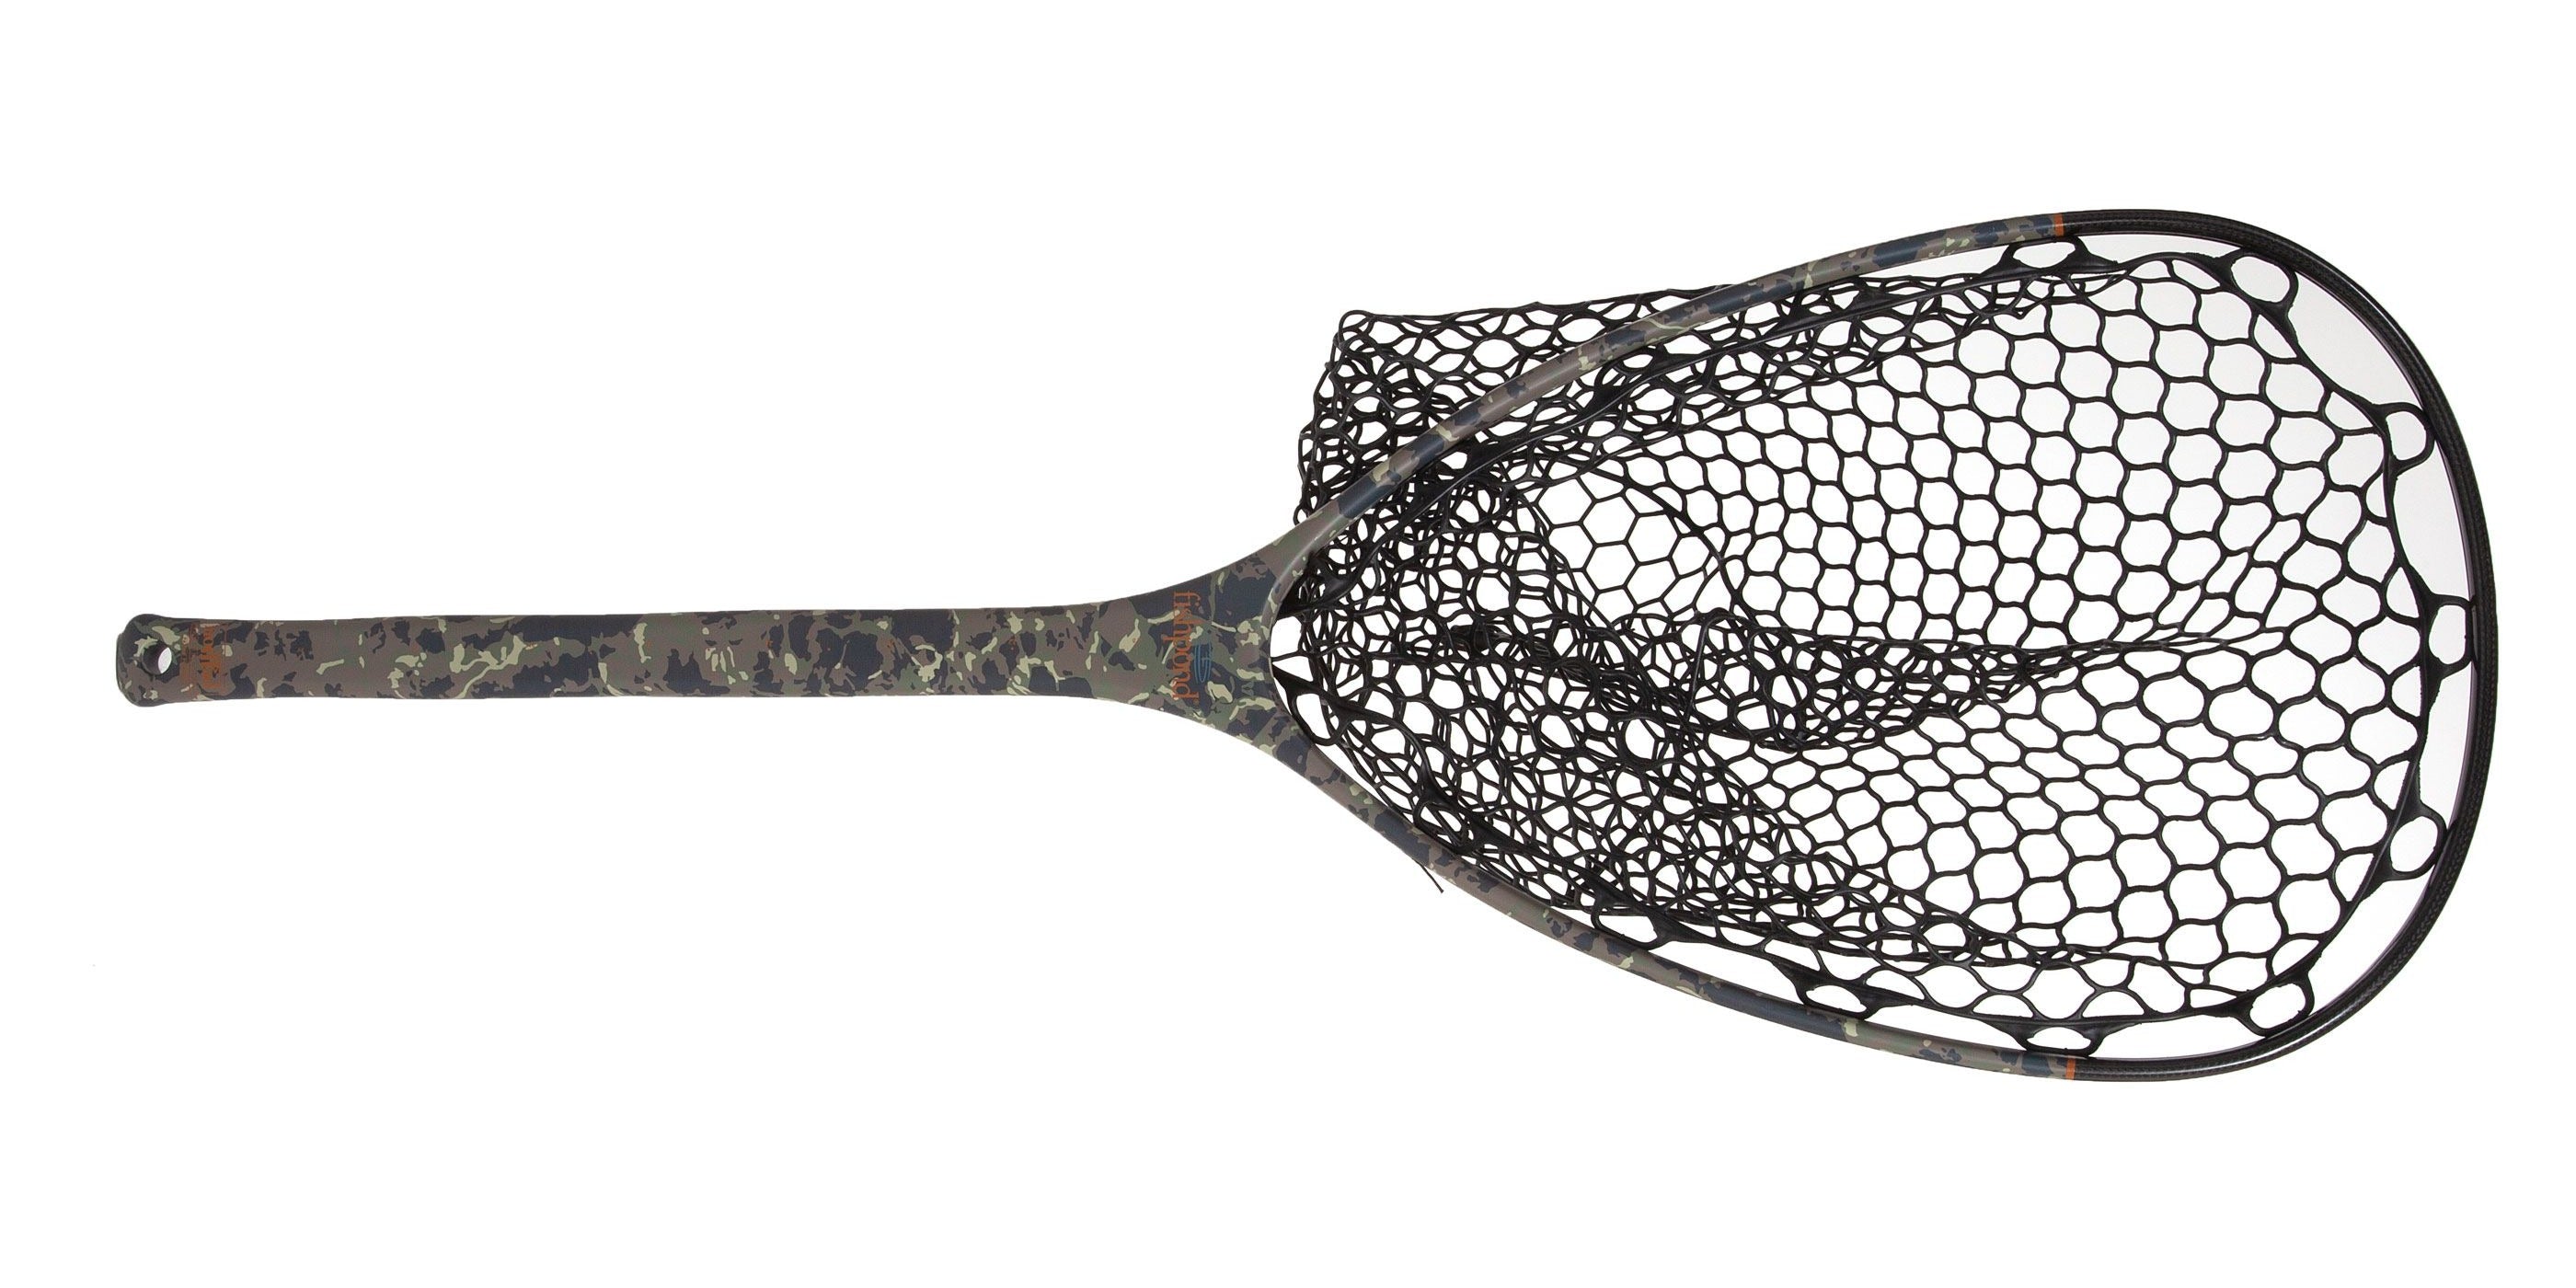 Fishpond - Nomad Mid-Length Net- Riverbed Camo